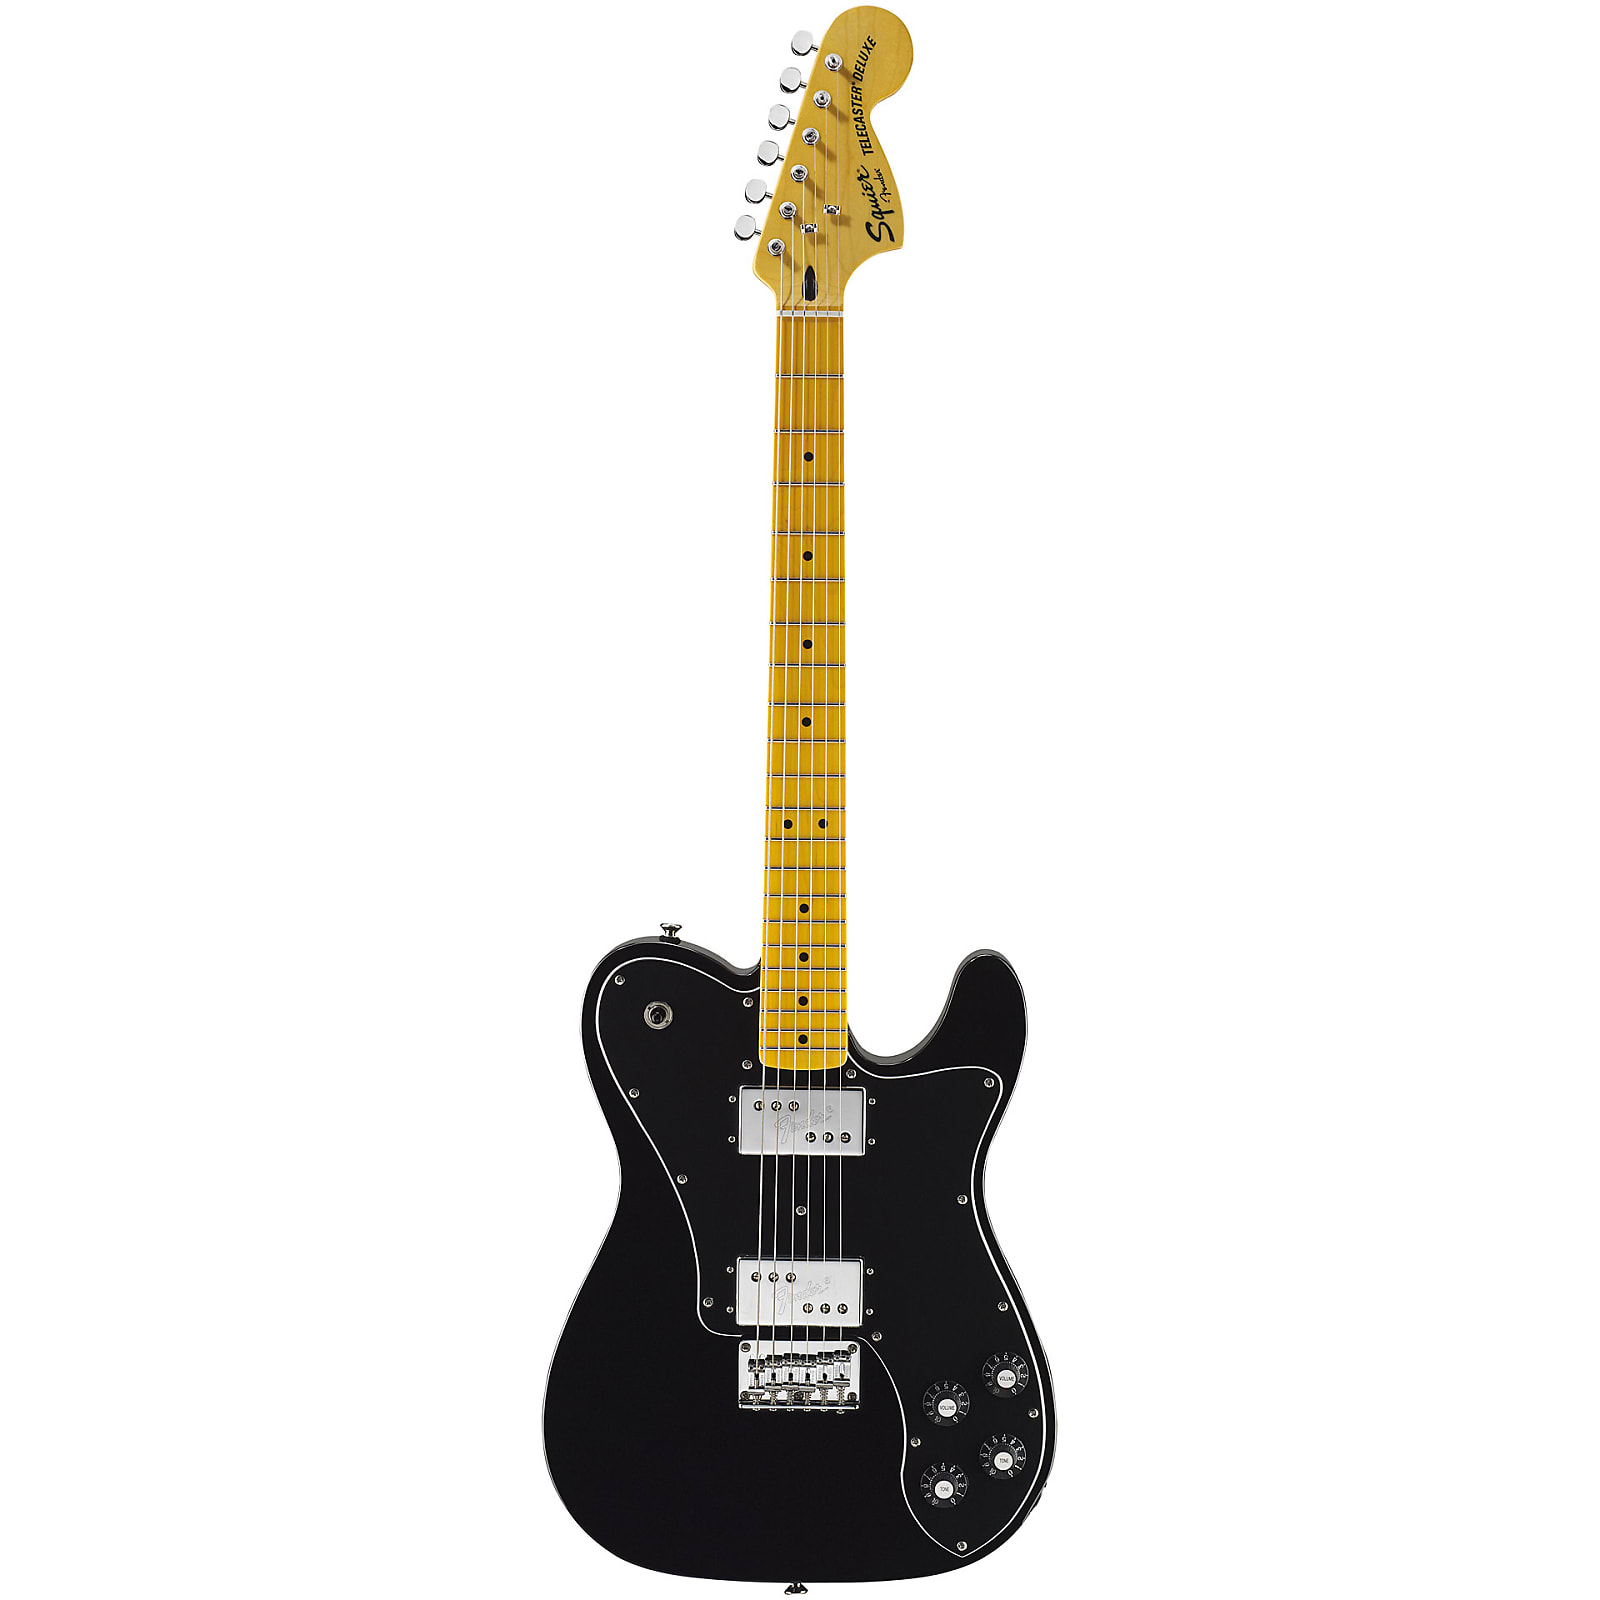 Squier Vintage Modified Telecaster Deluxe | Reverb Canada